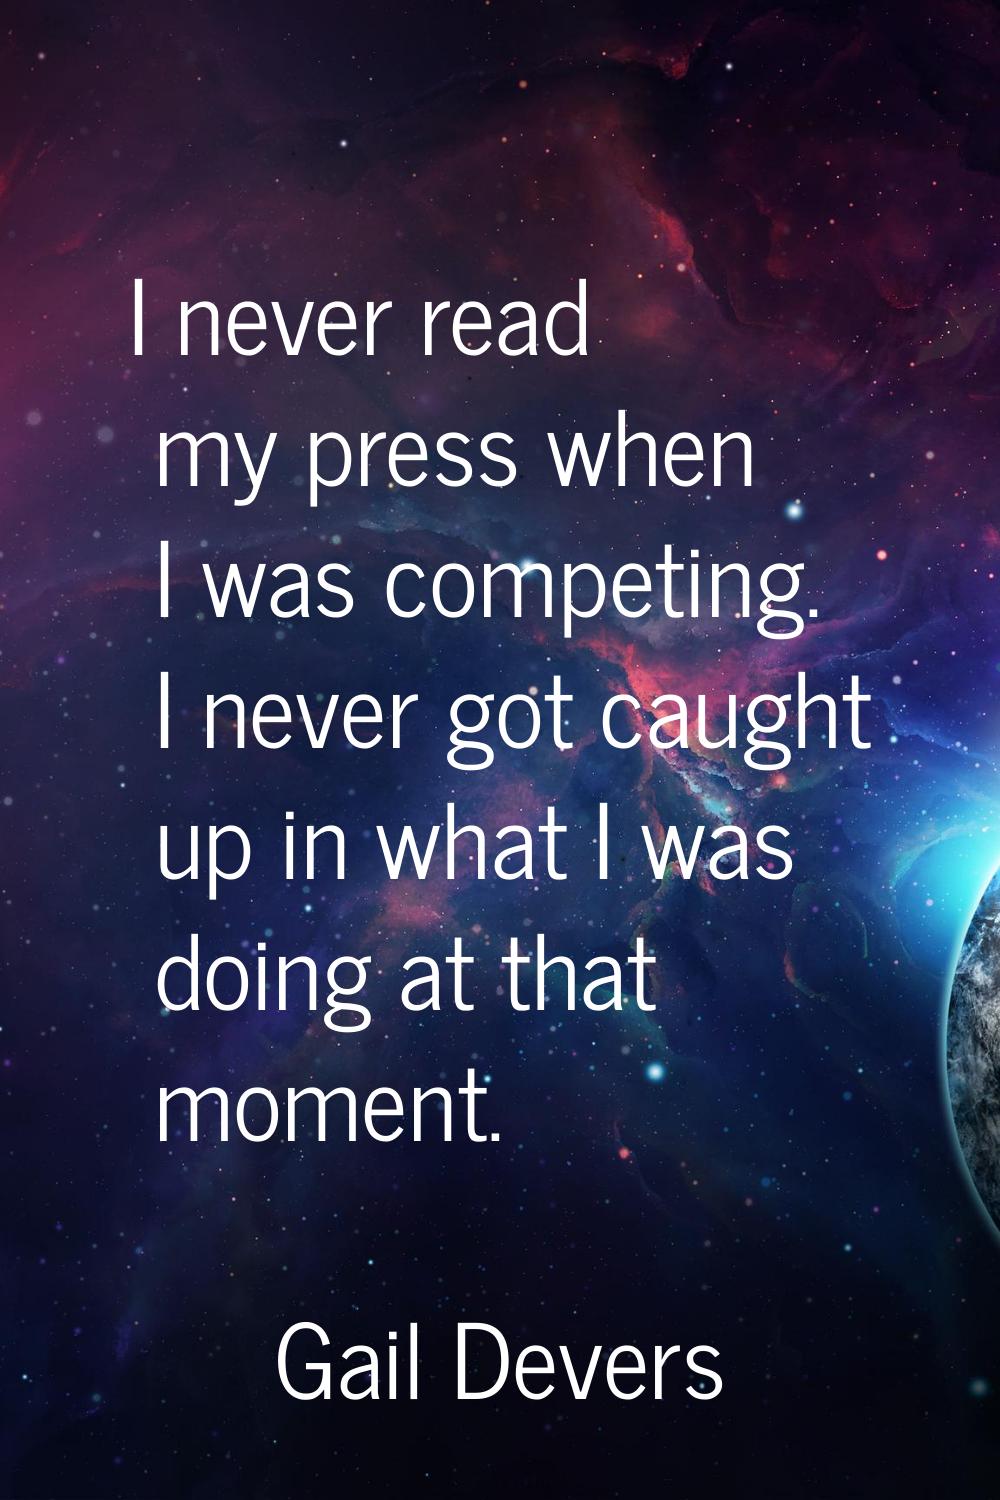 I never read my press when I was competing. I never got caught up in what I was doing at that momen